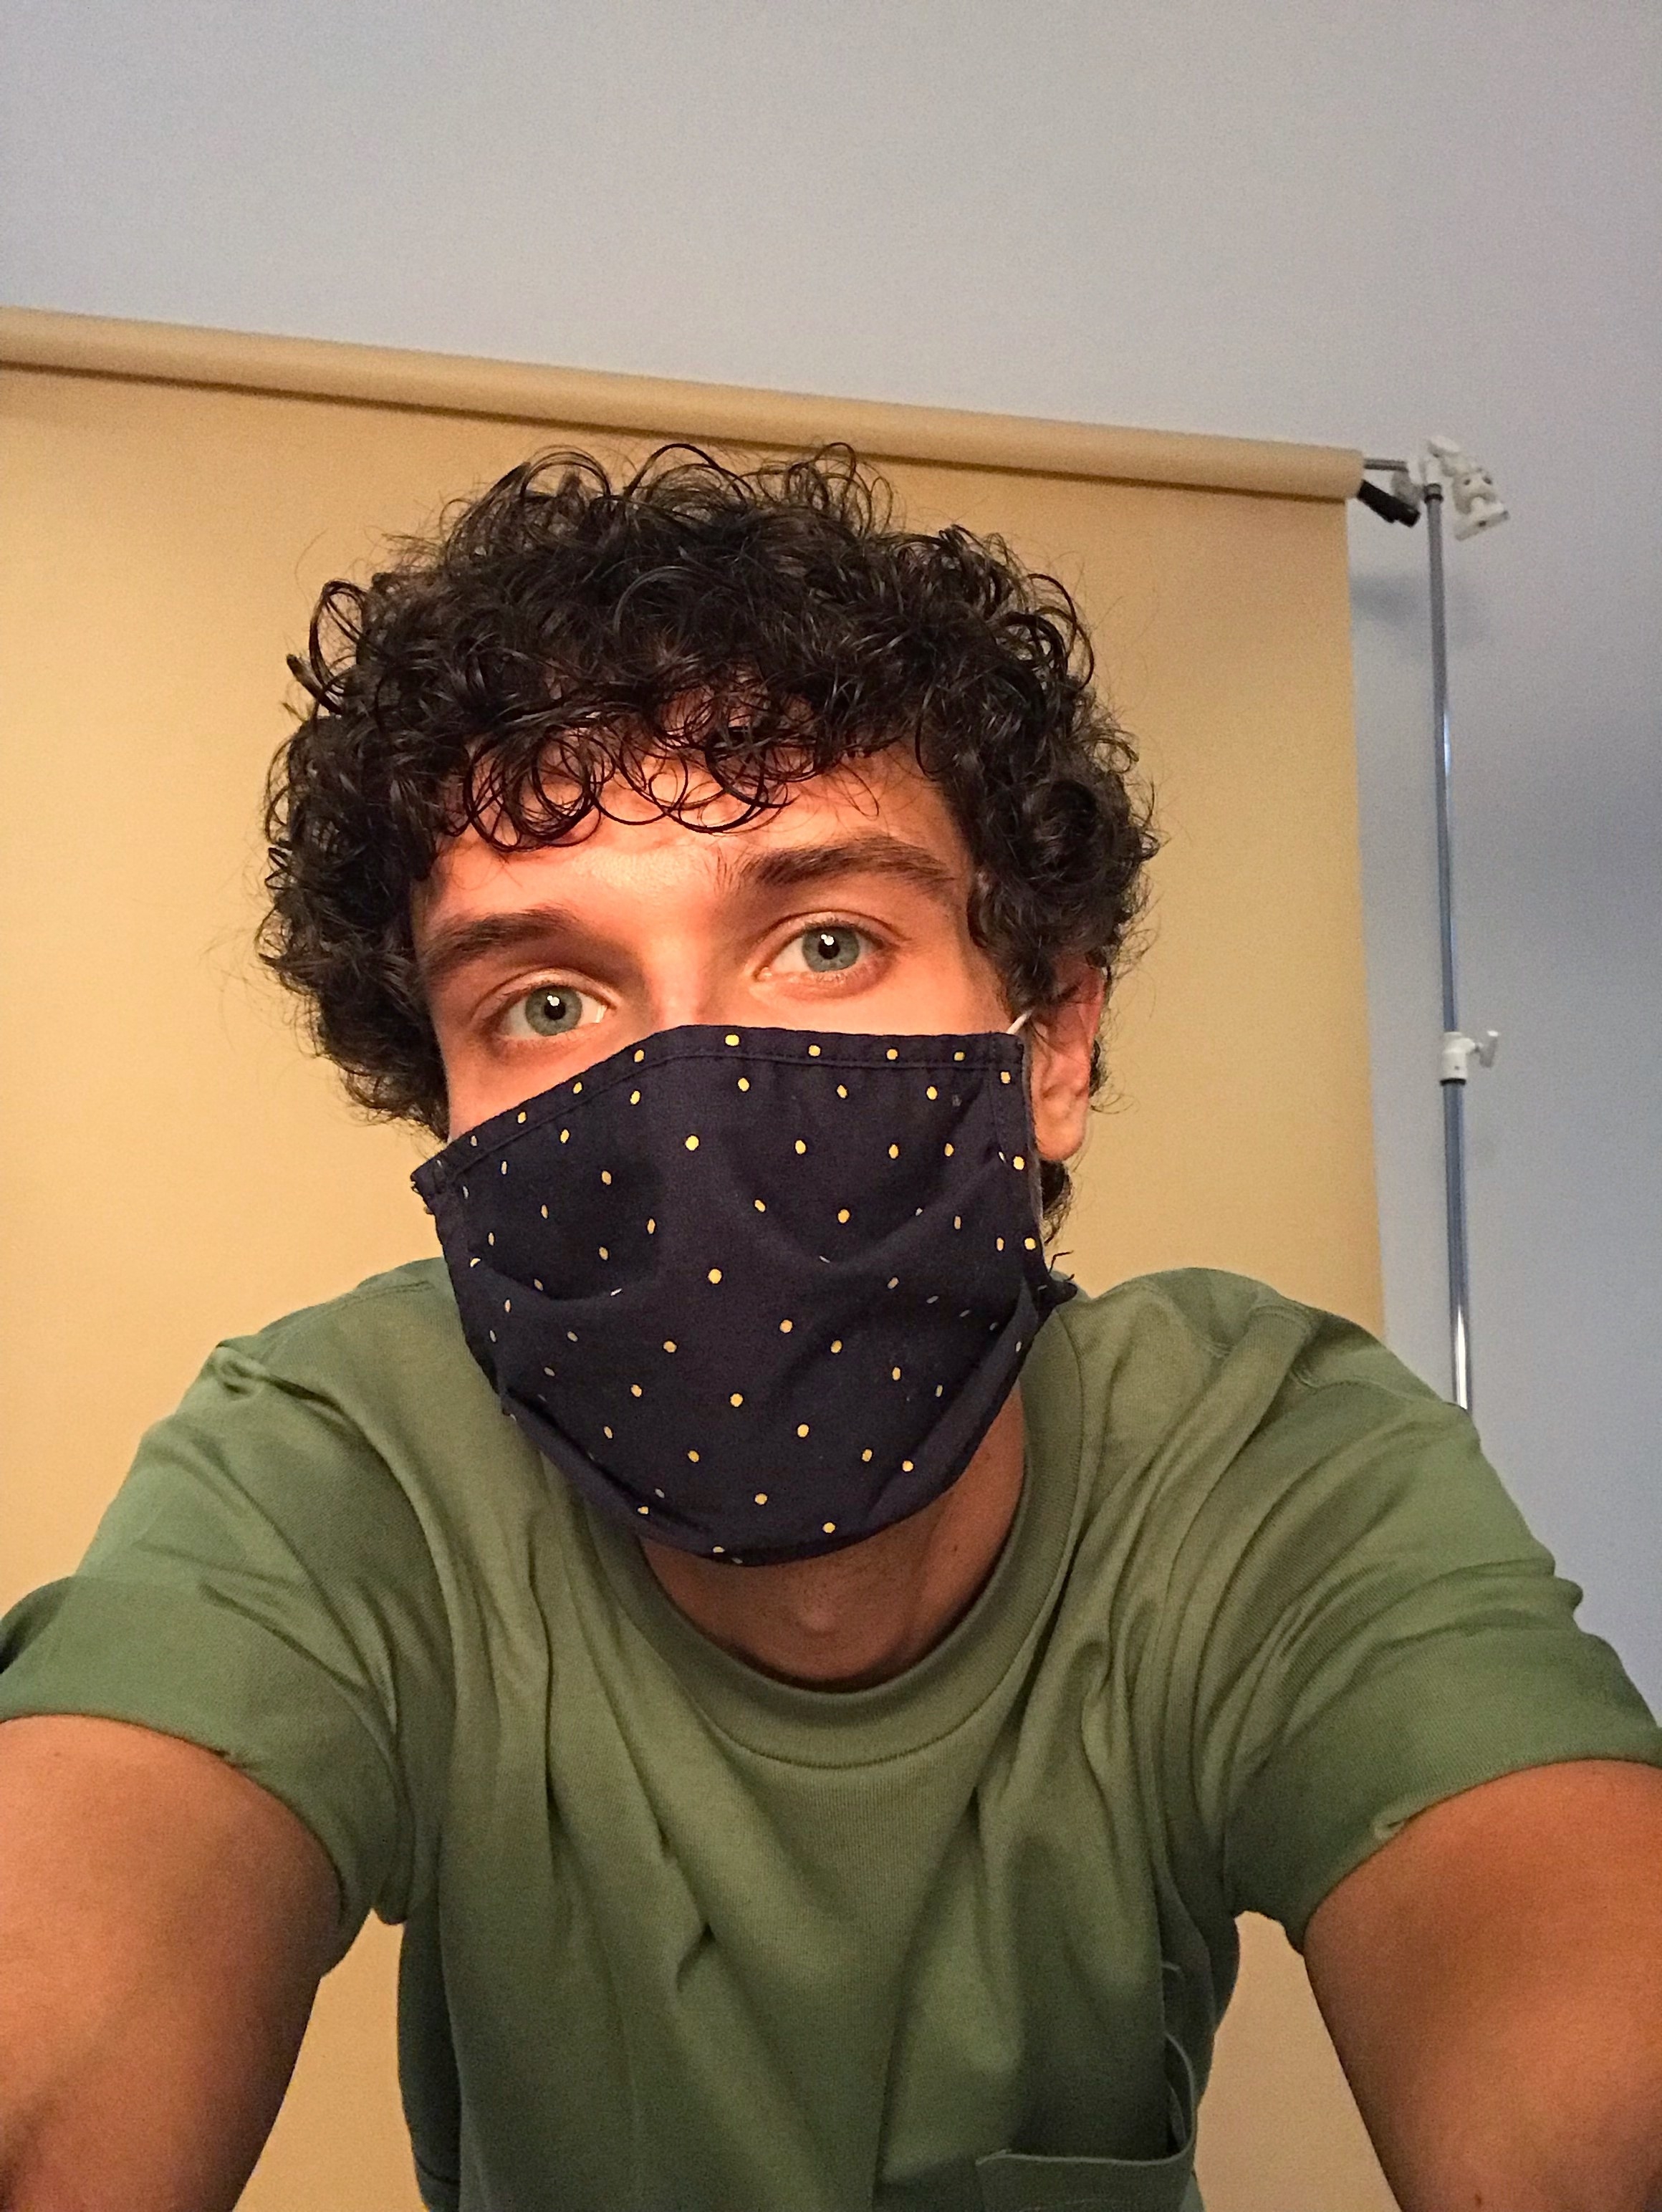 A person taking a selfie while wearing a polka dot print face mask